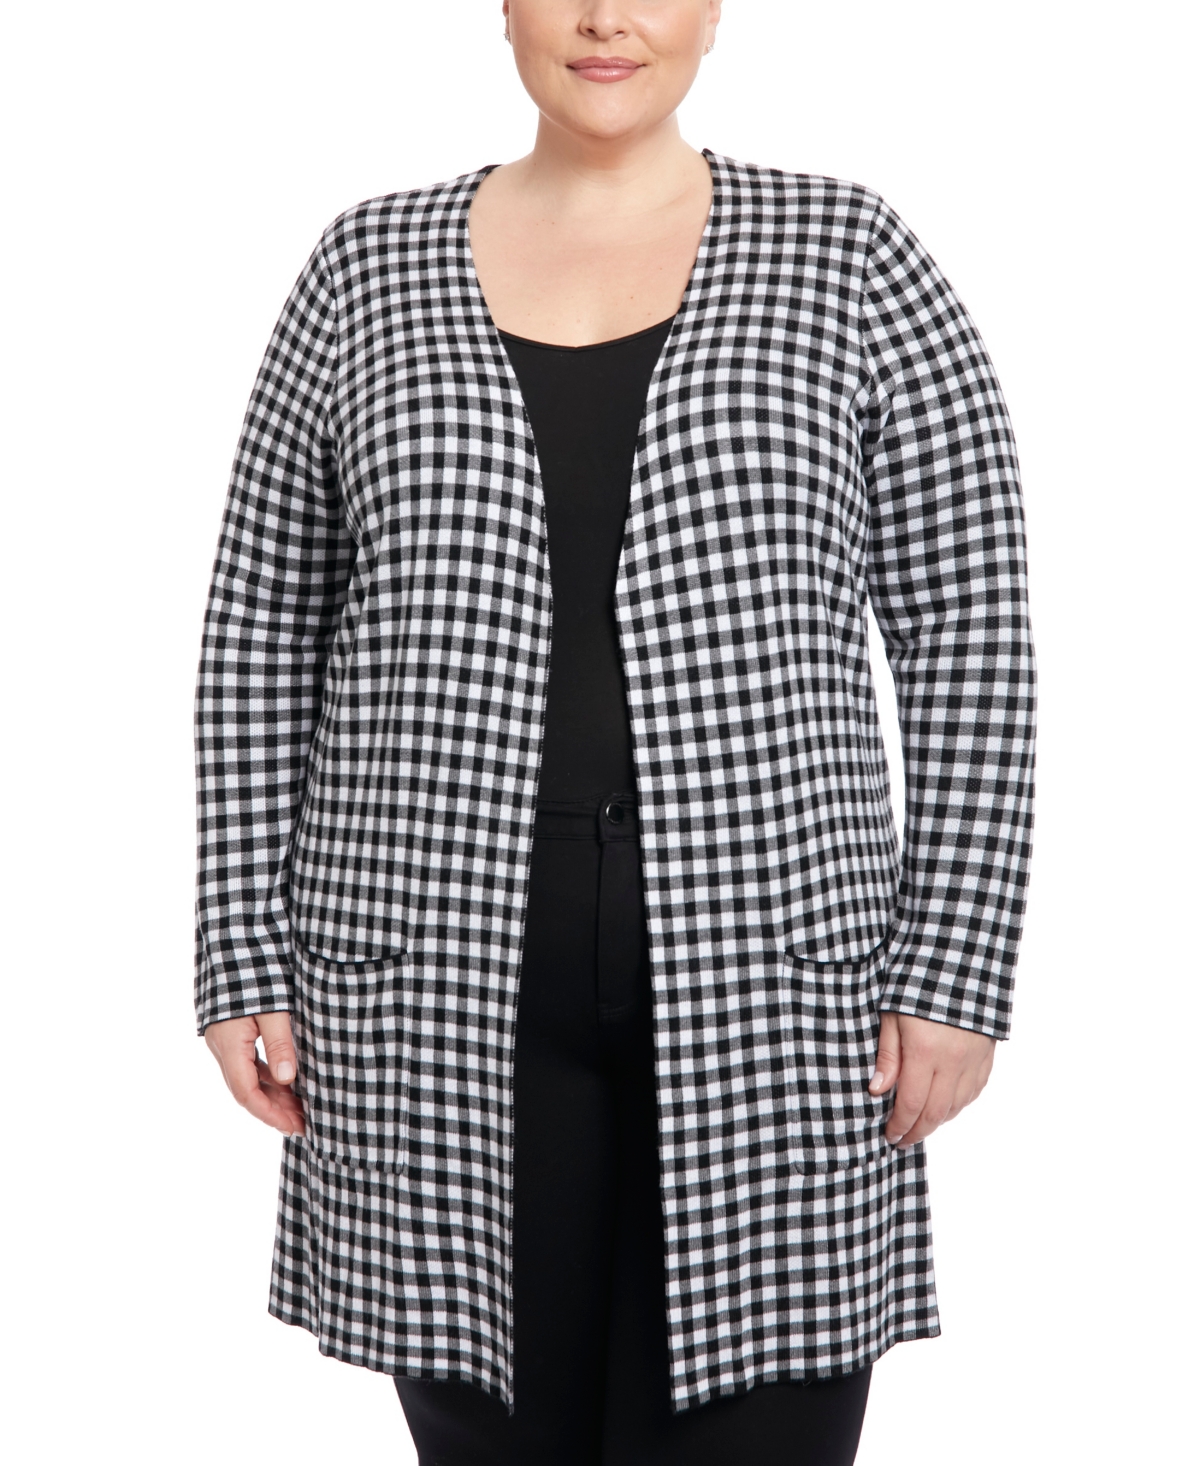 Joseph A Plus Size Open-Front Duster Cardigan Sweater